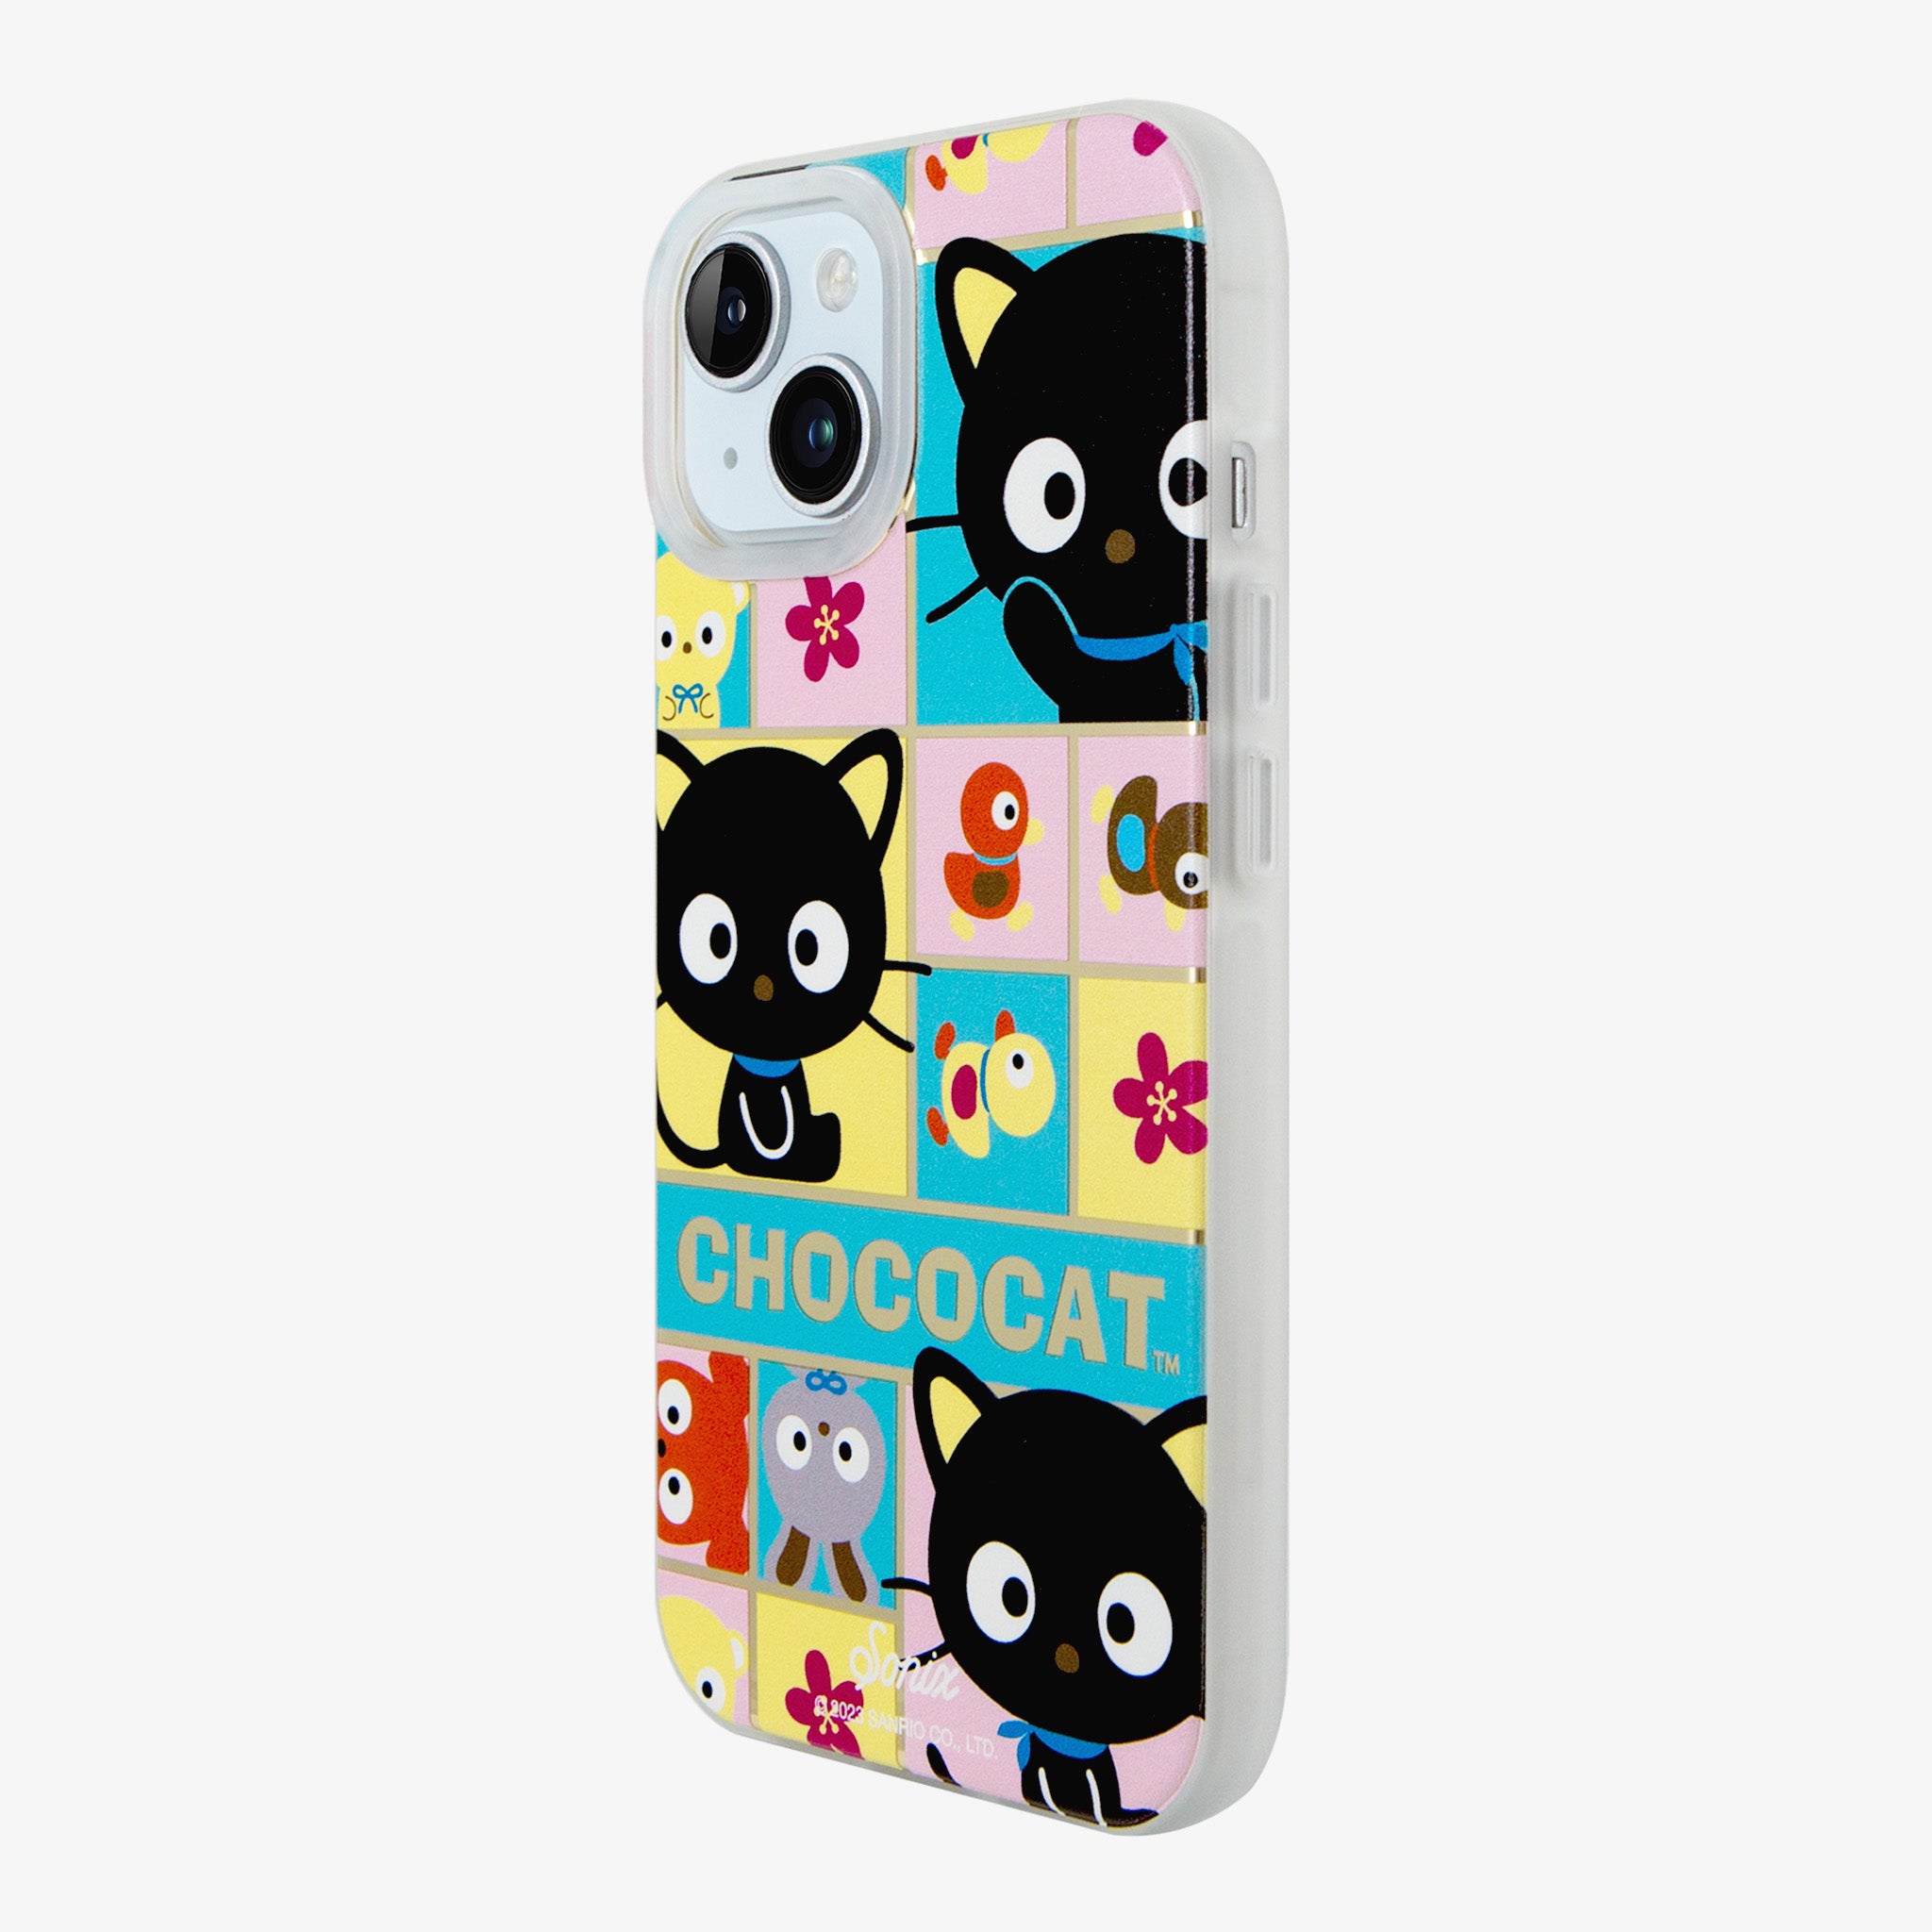 Chococat™ Cute and Colorful iPhone Case - Sonix